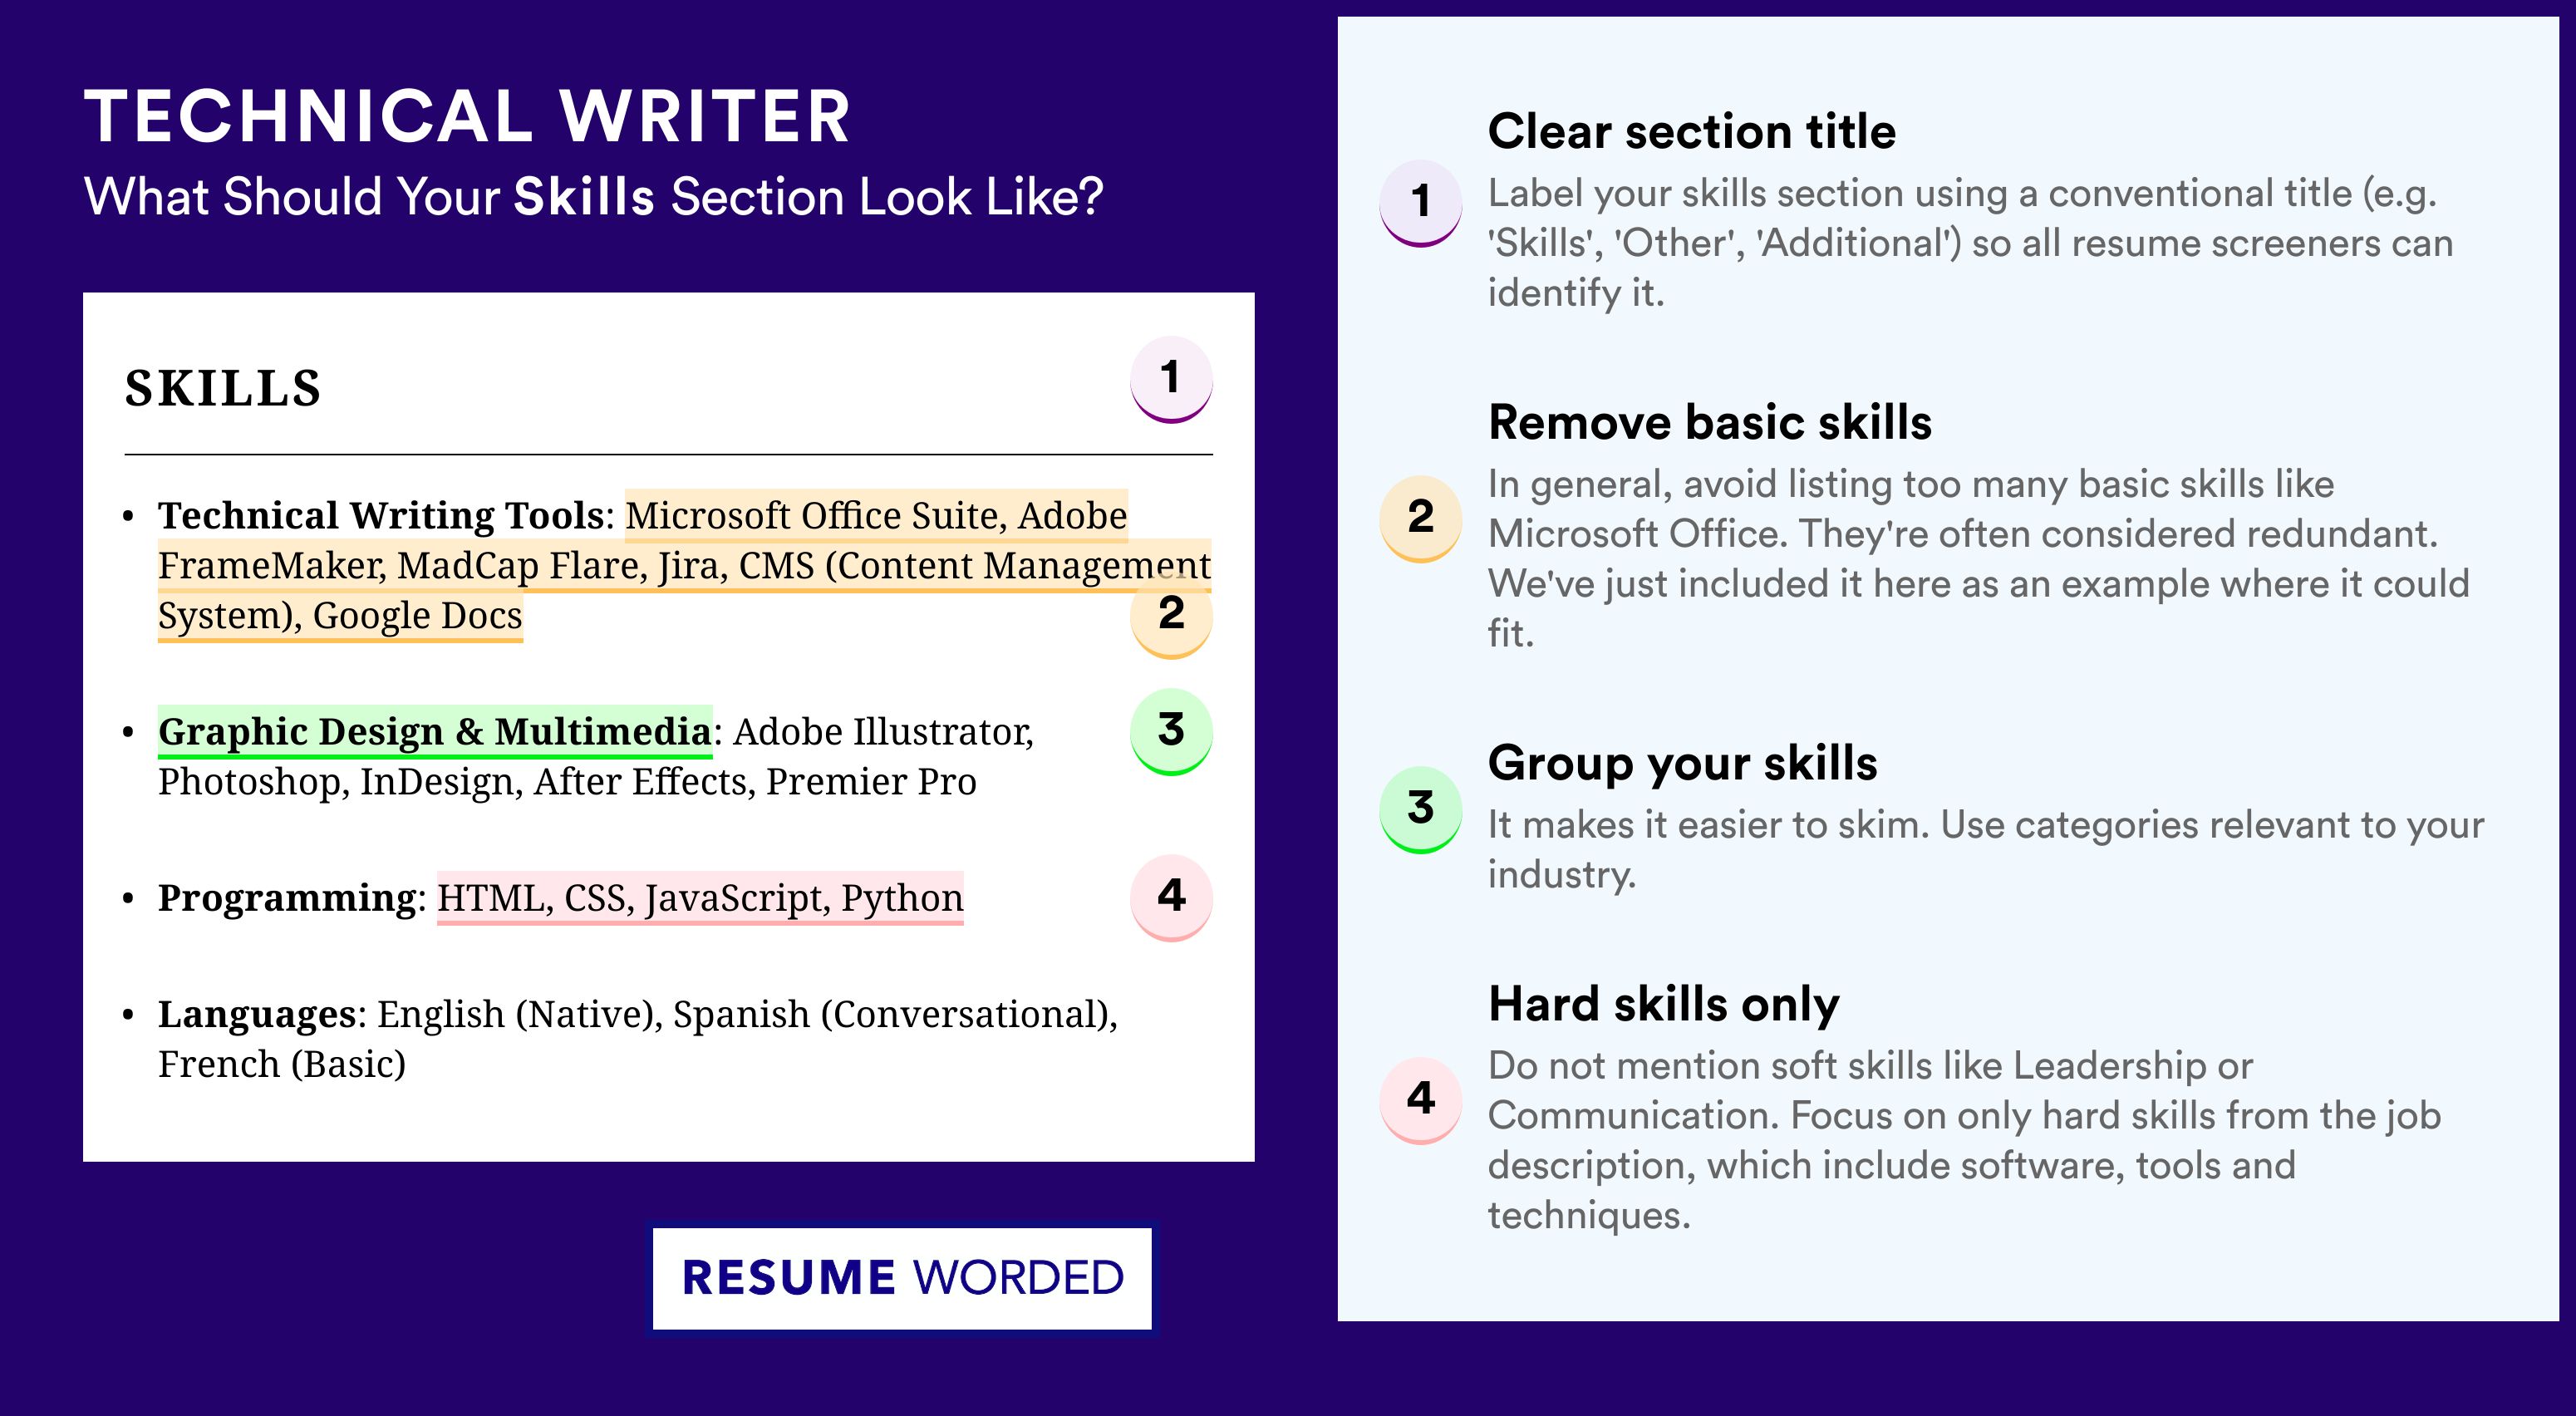 How To Write Your Skills Section - Technical Writer Roles